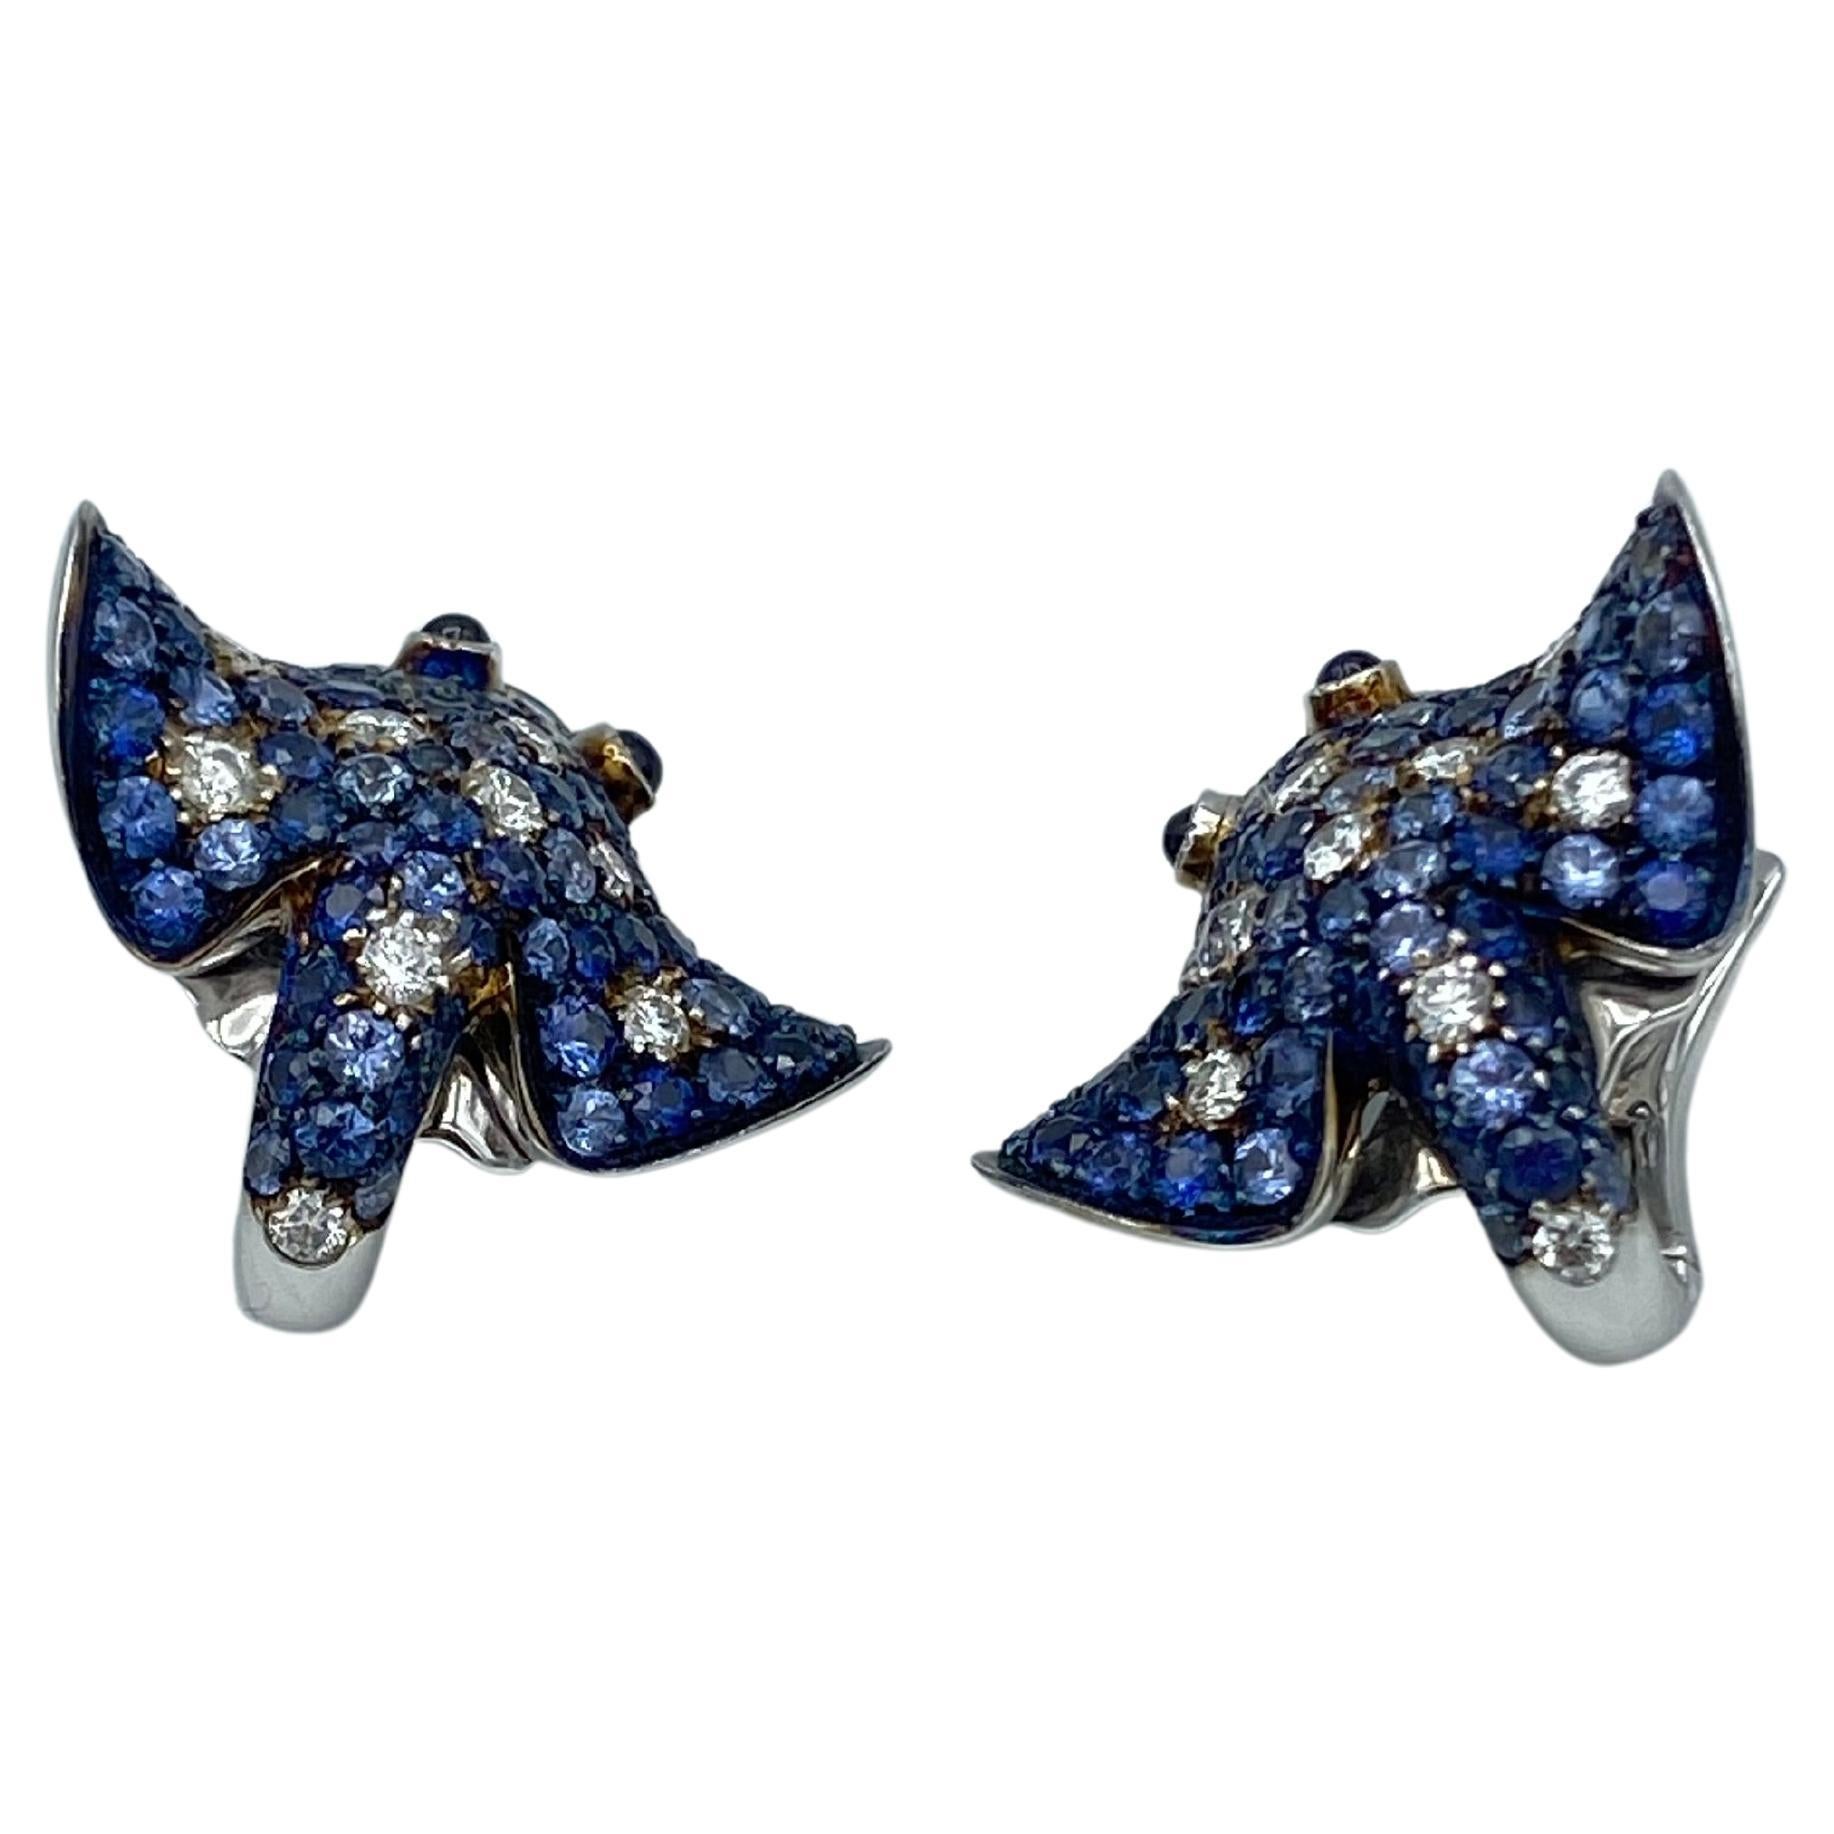 Ray Fish White Diamond Blue Sapphire 18Kt Gold Earrings Made in Italy
These earrings are handcrafted in my workshop in Verona, Northern Italy. 
They are covered with diamonds and blue sapphires in three different shades and their eyes are two blue